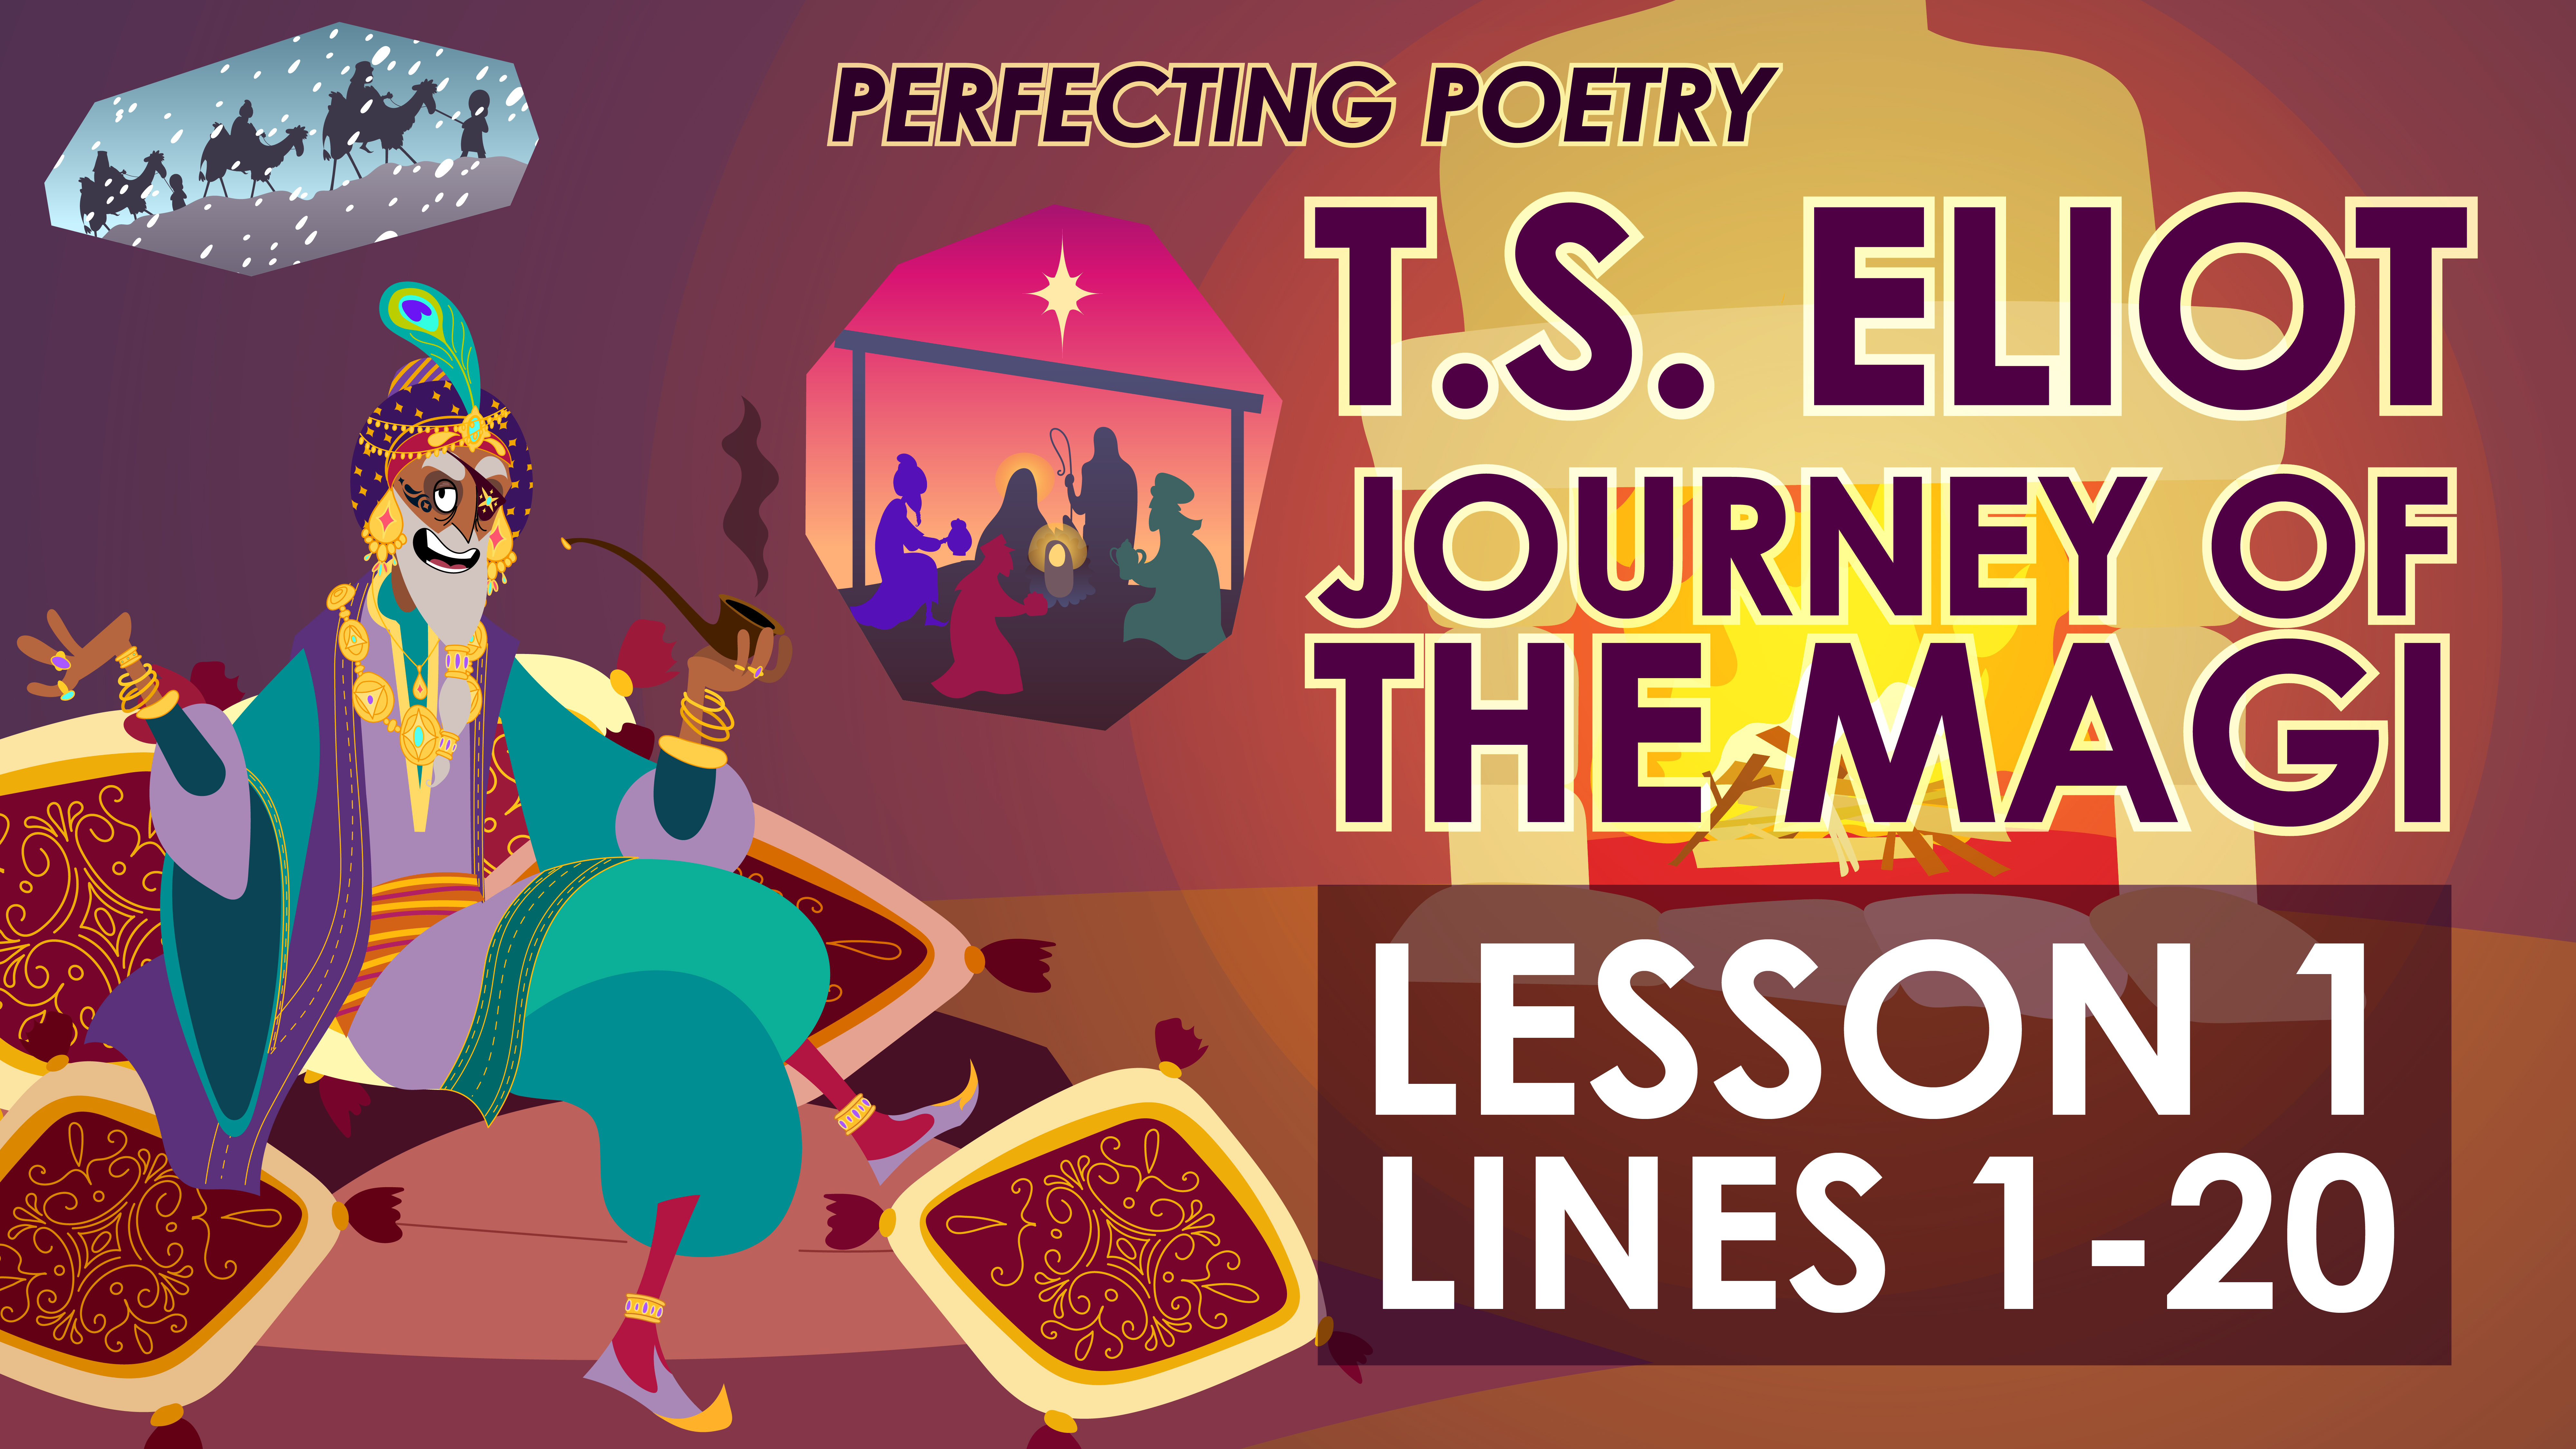 Journey Of The Magi - Lines 1-20 - T.S. Eliot - Perfecting Poetry